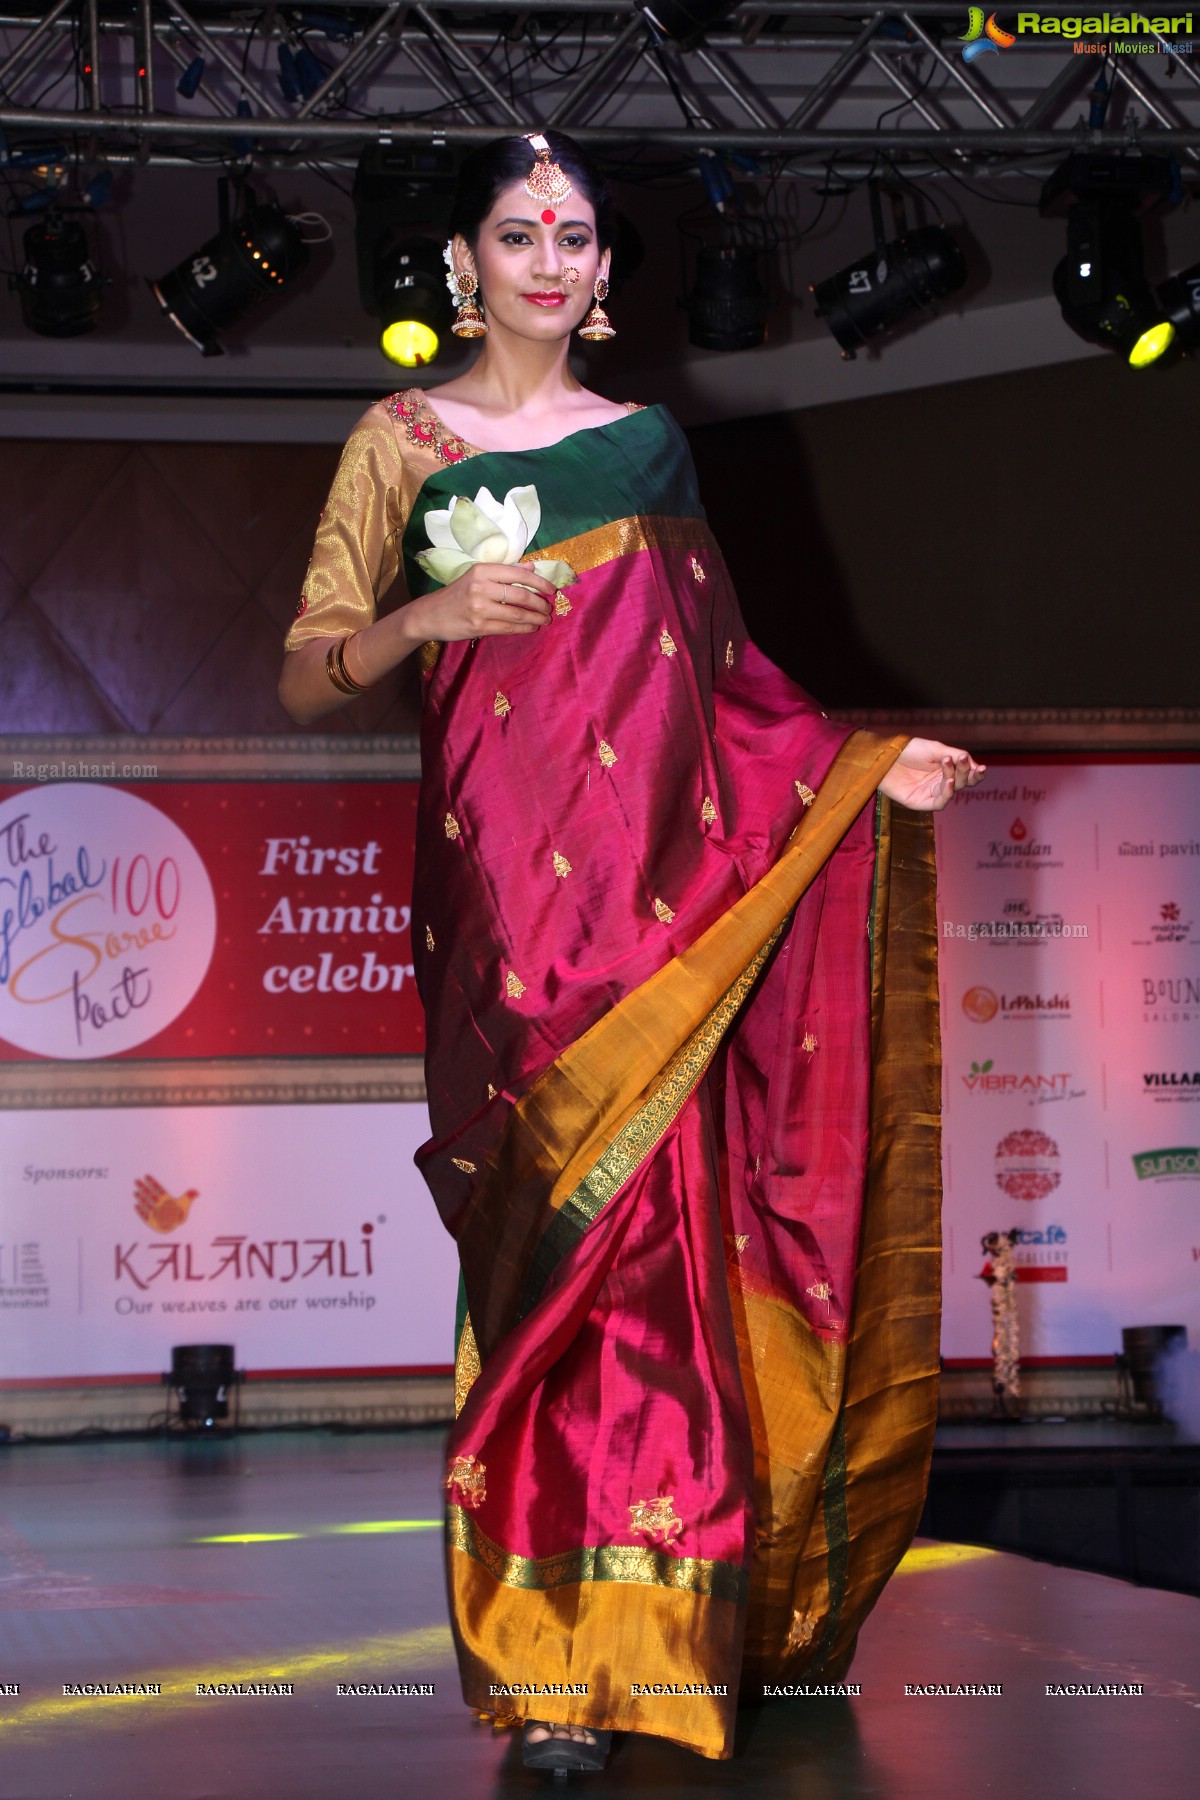 The Global 100 Sarees Pact Group First Anniversary Celebrations at Hyderabad Marriott Hotel and Convention Centre